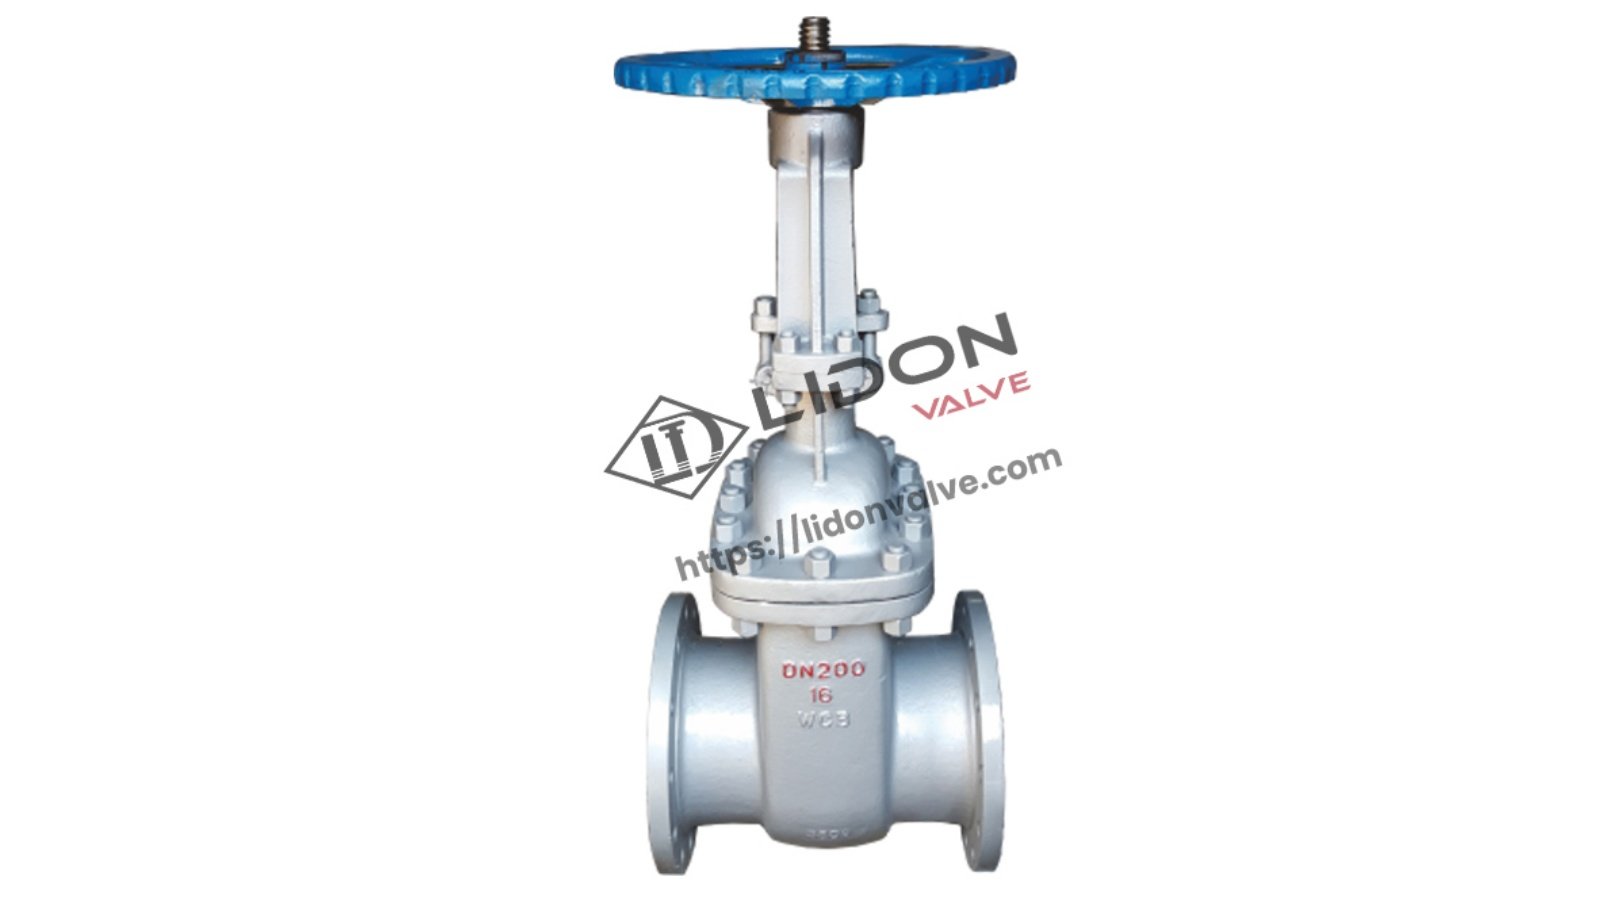 The Benefits of Using a Parallel Double Disc Gate Valve